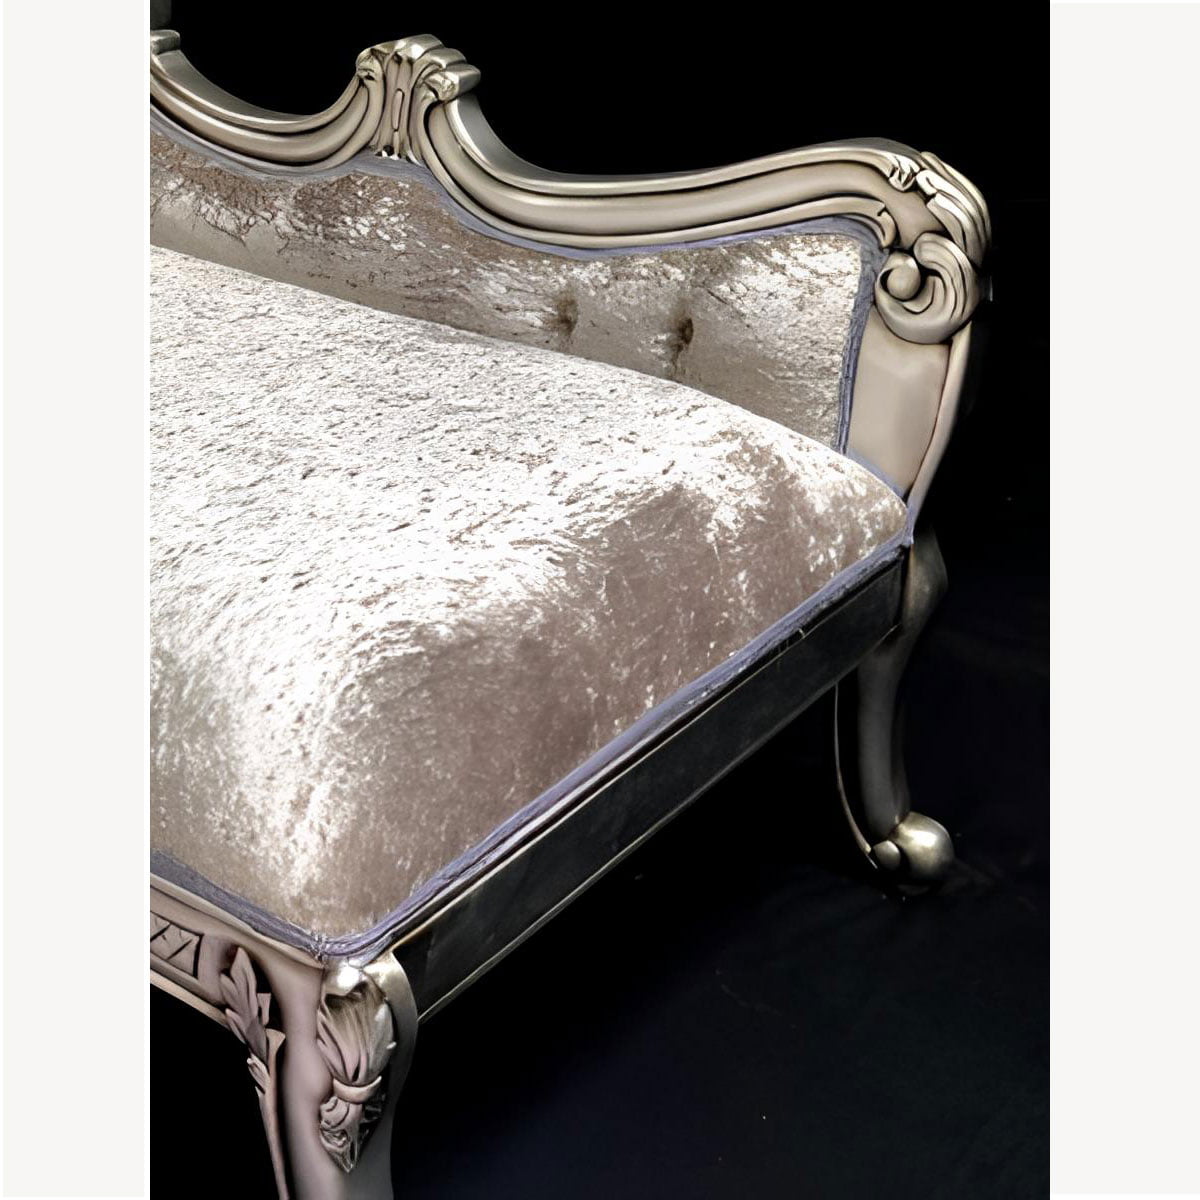 Armani Chaise Longue In Silver Leaf Mercury Silver Crushed Velvet 2 - Hampshire Barn Interiors - Home - Hampshire Barn Interiors News